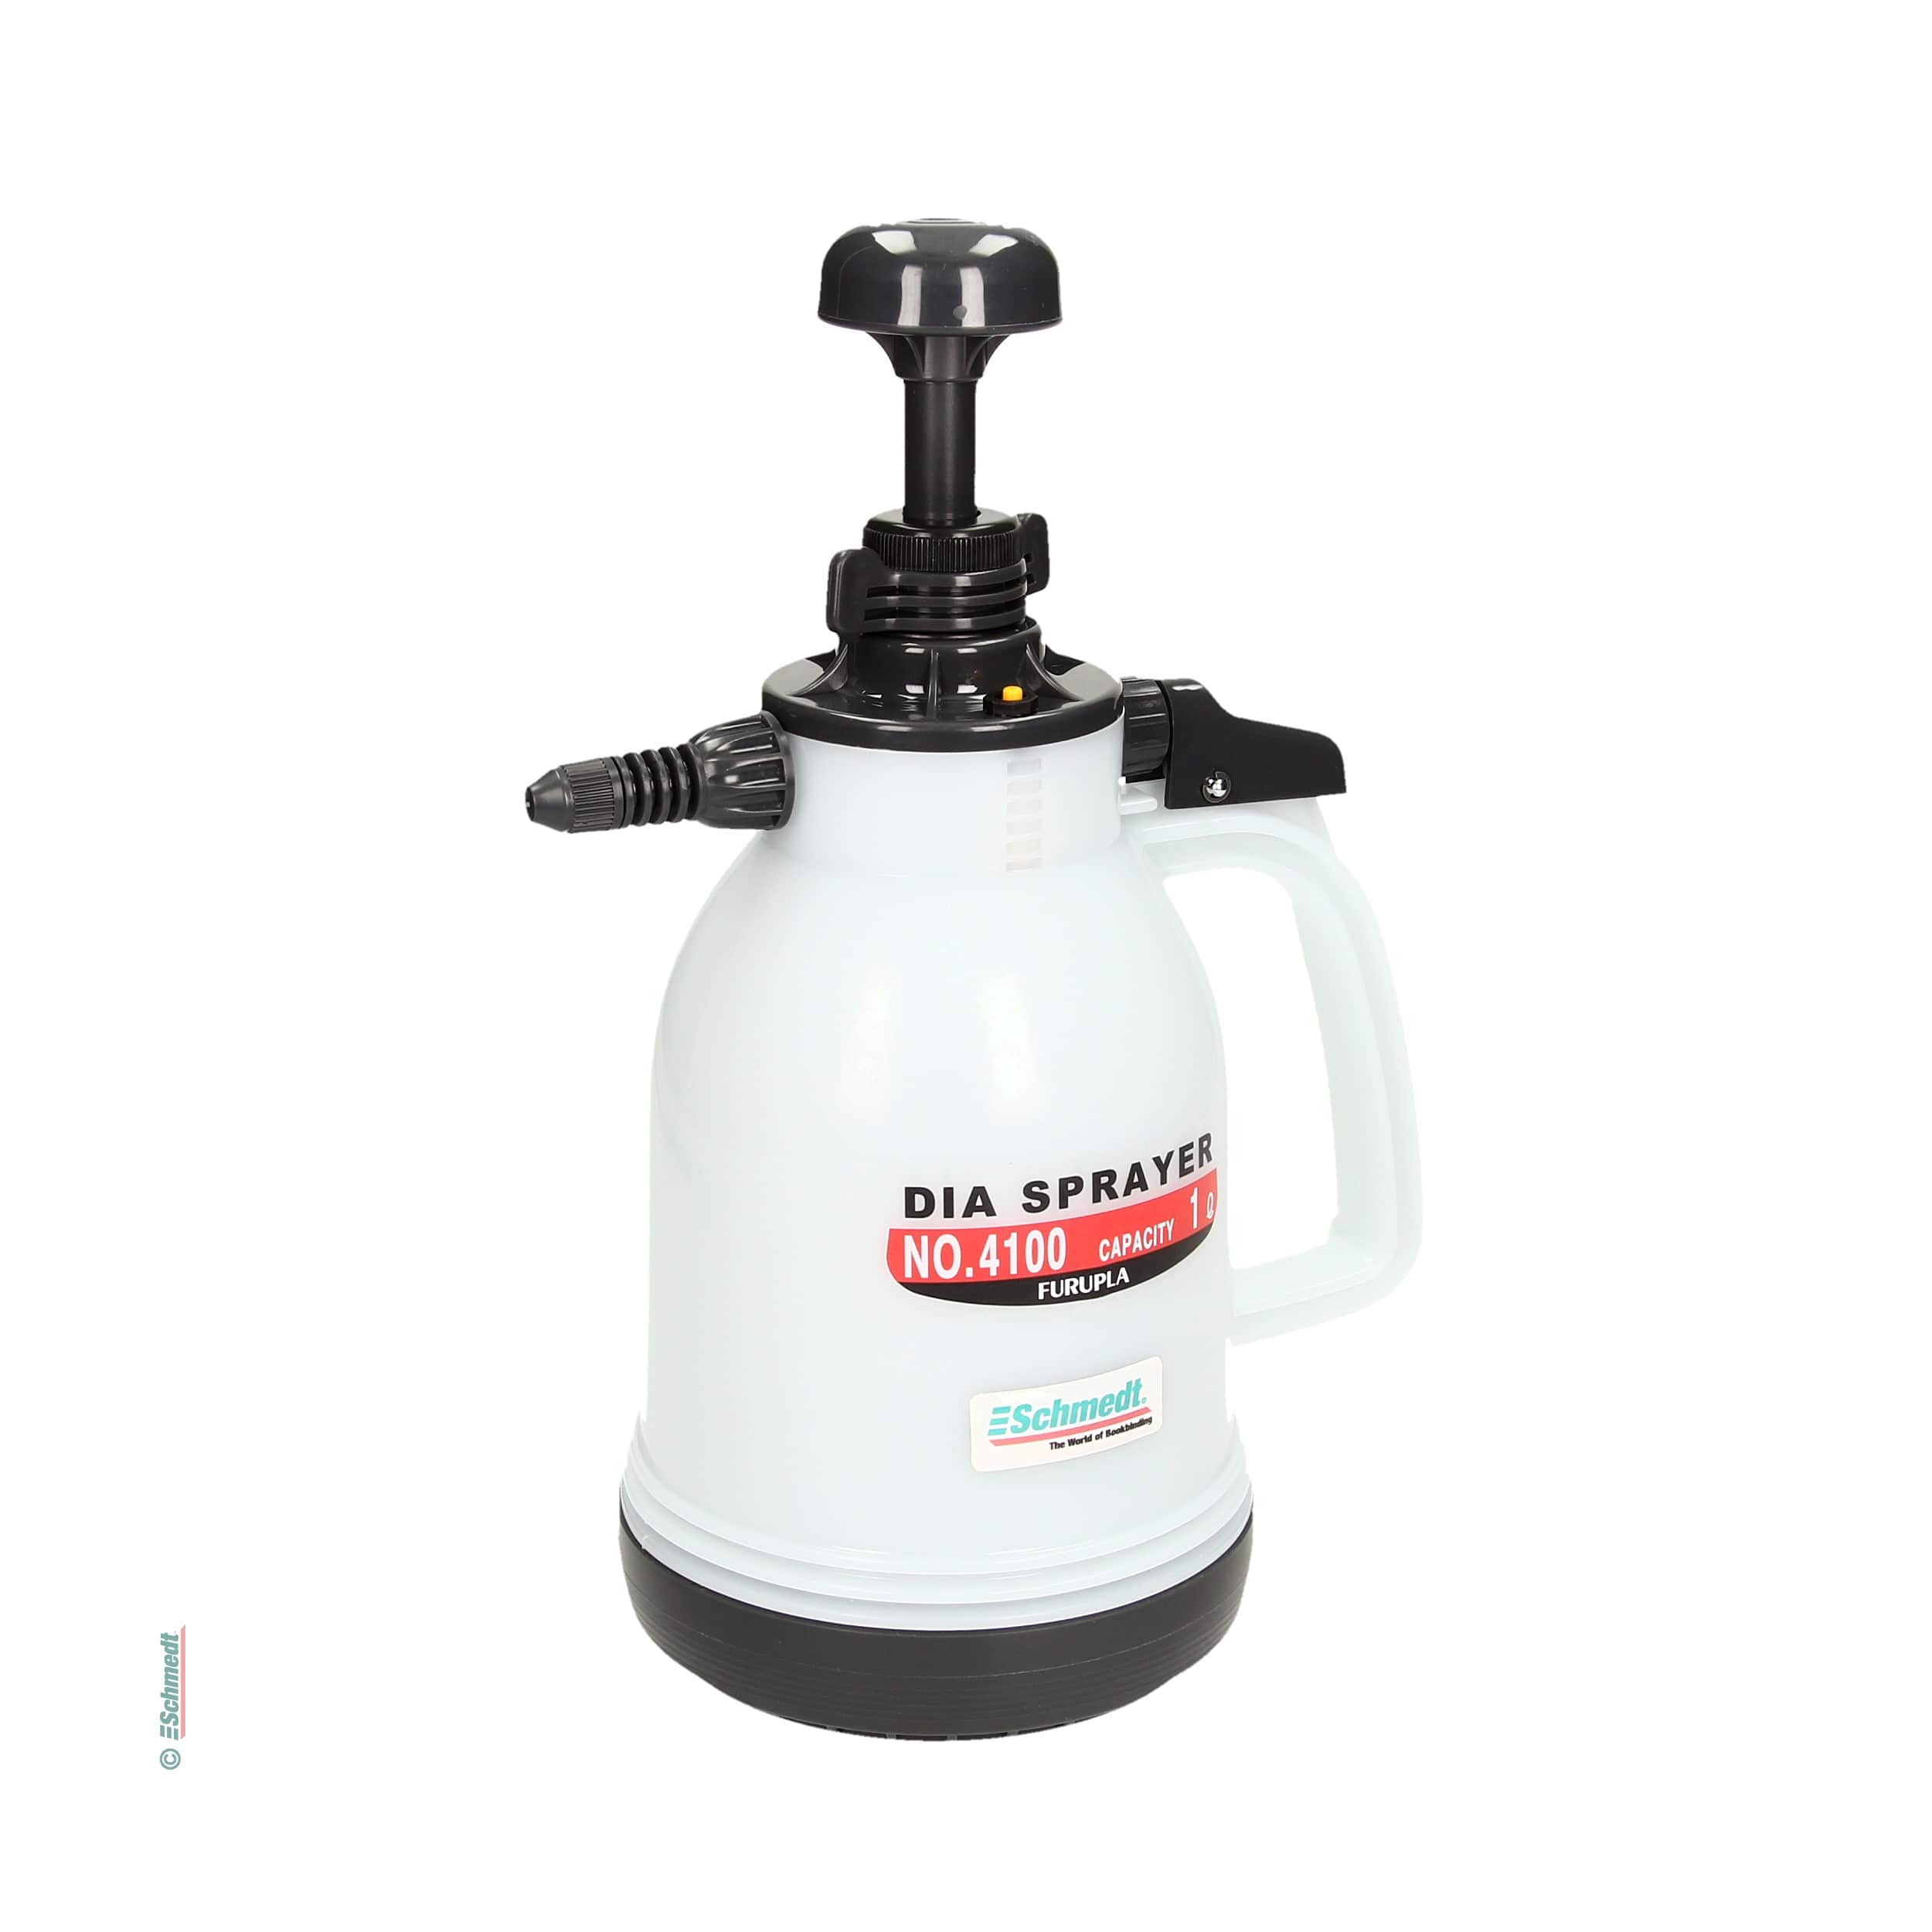 Water sprayer - Capacity: 1 ltr - to moisten larger surfaces...